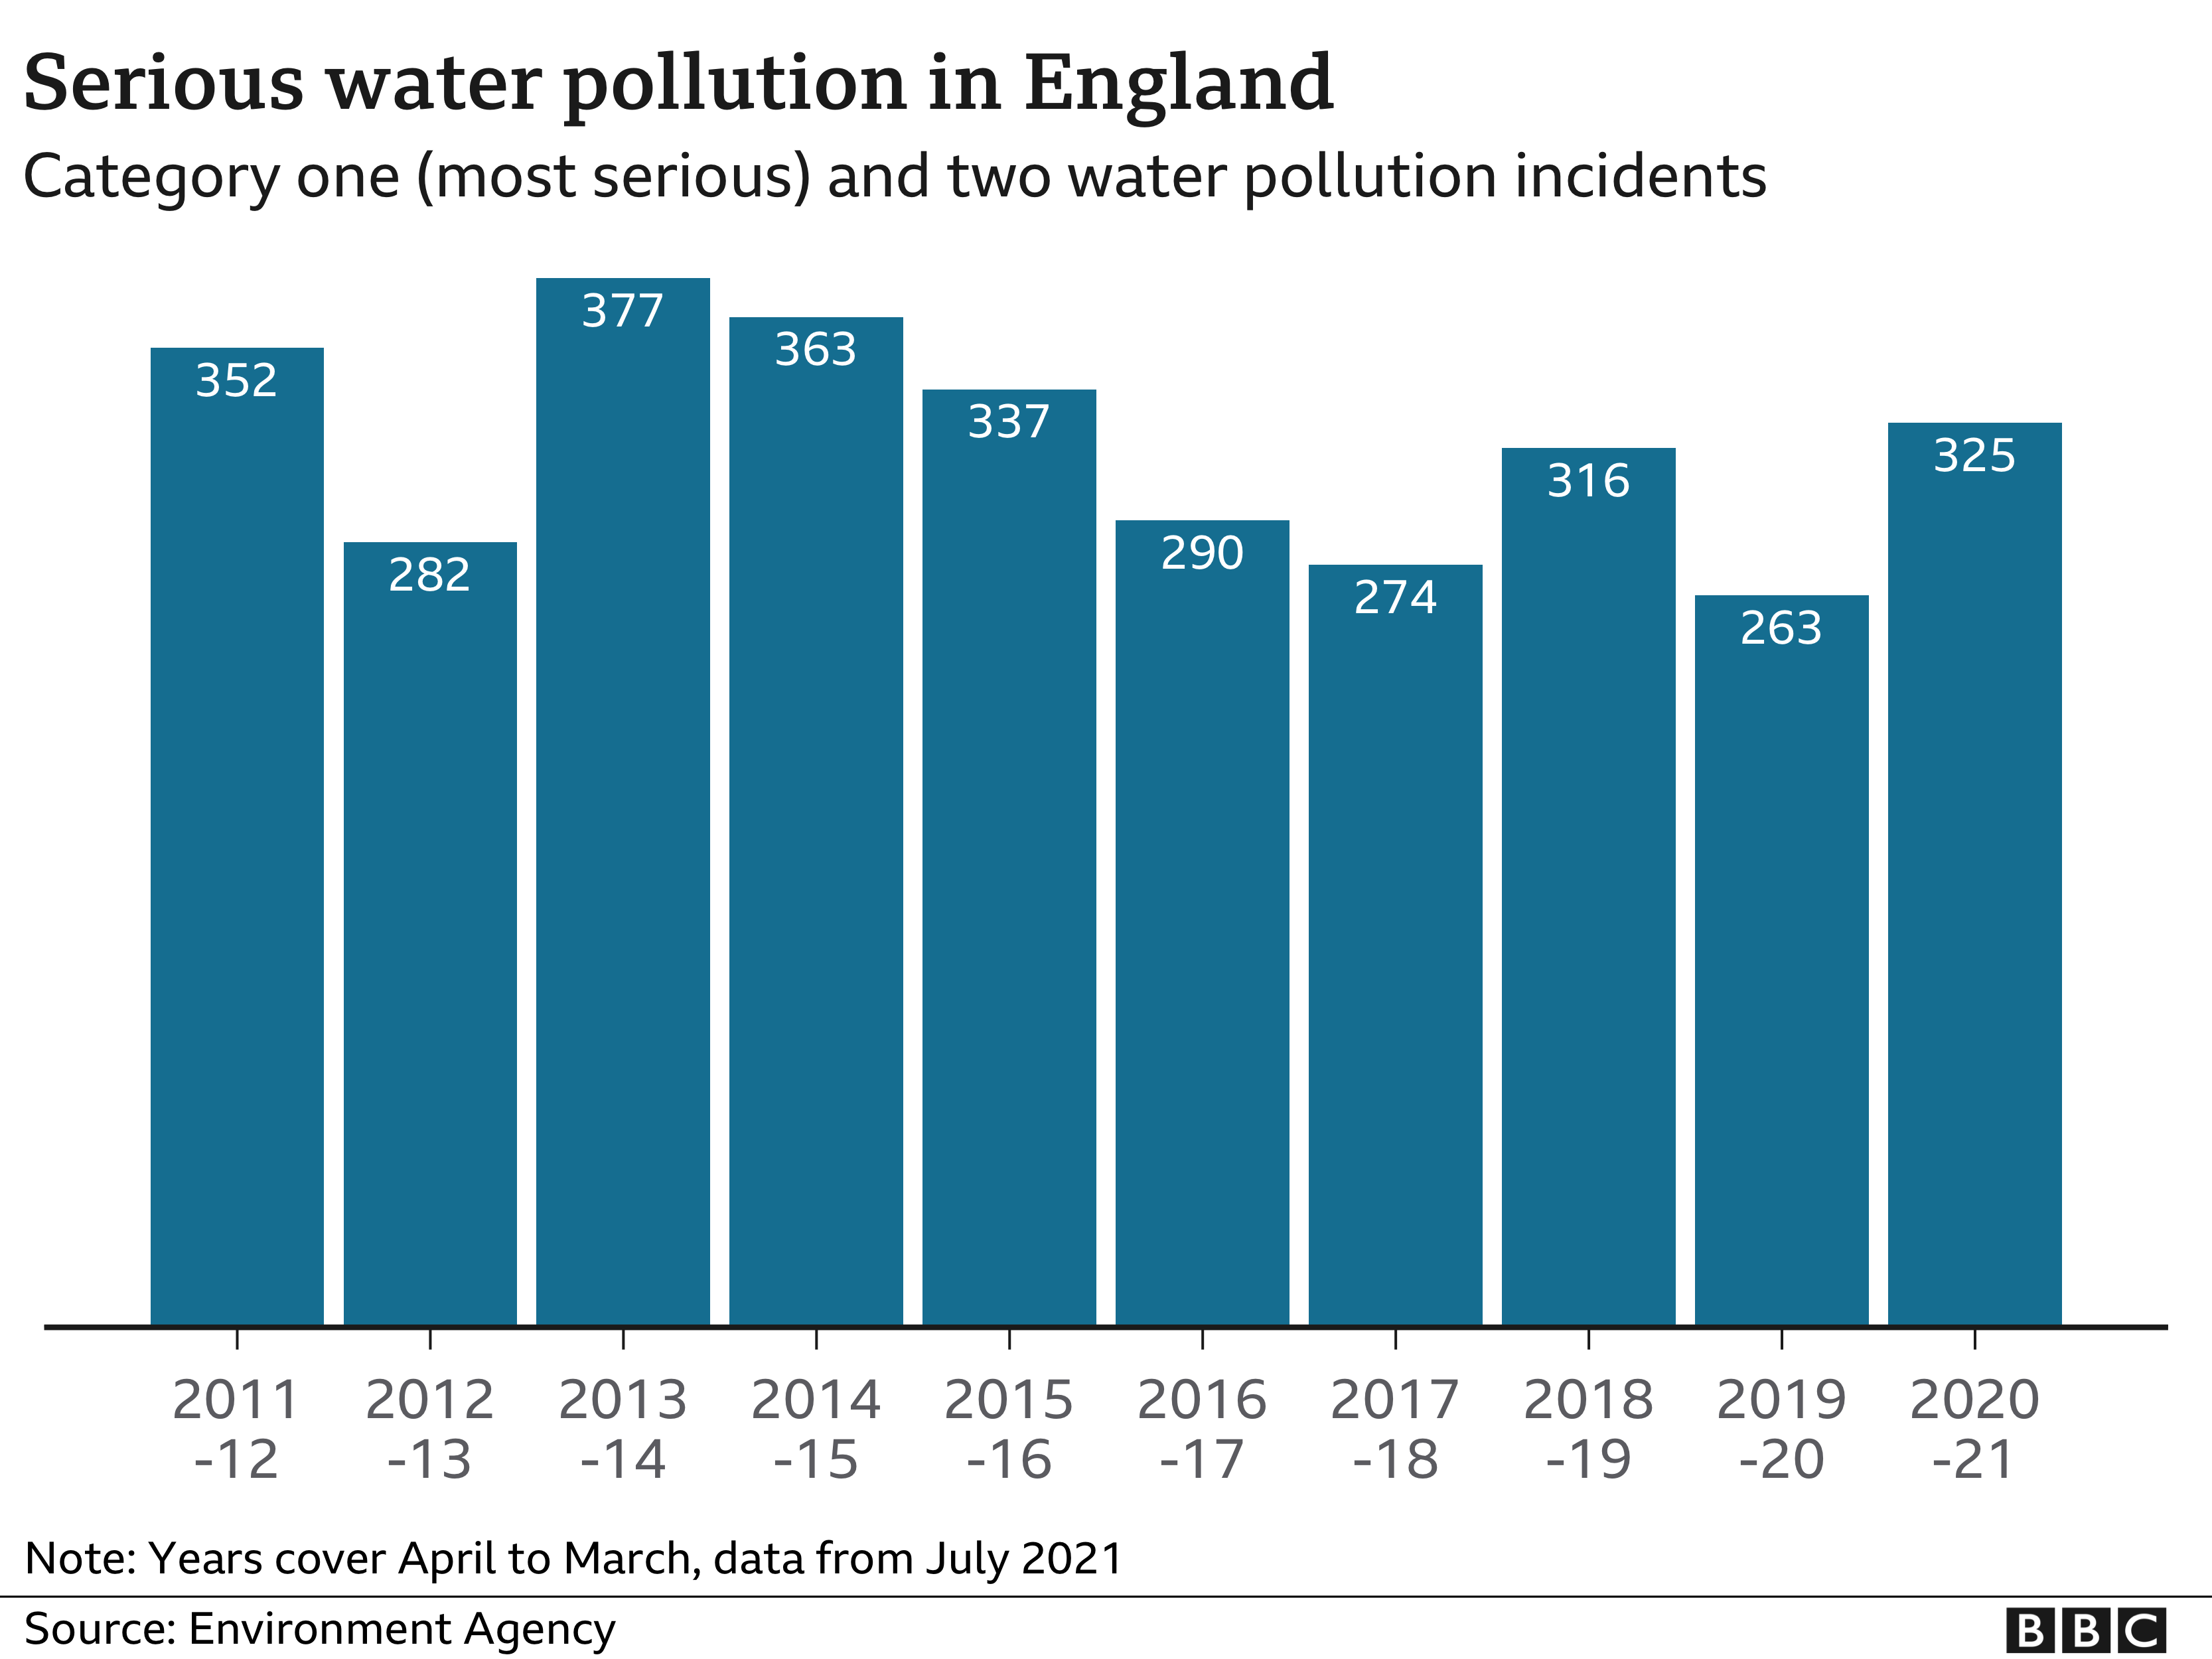 Chart showing serious water pollution incidents in England